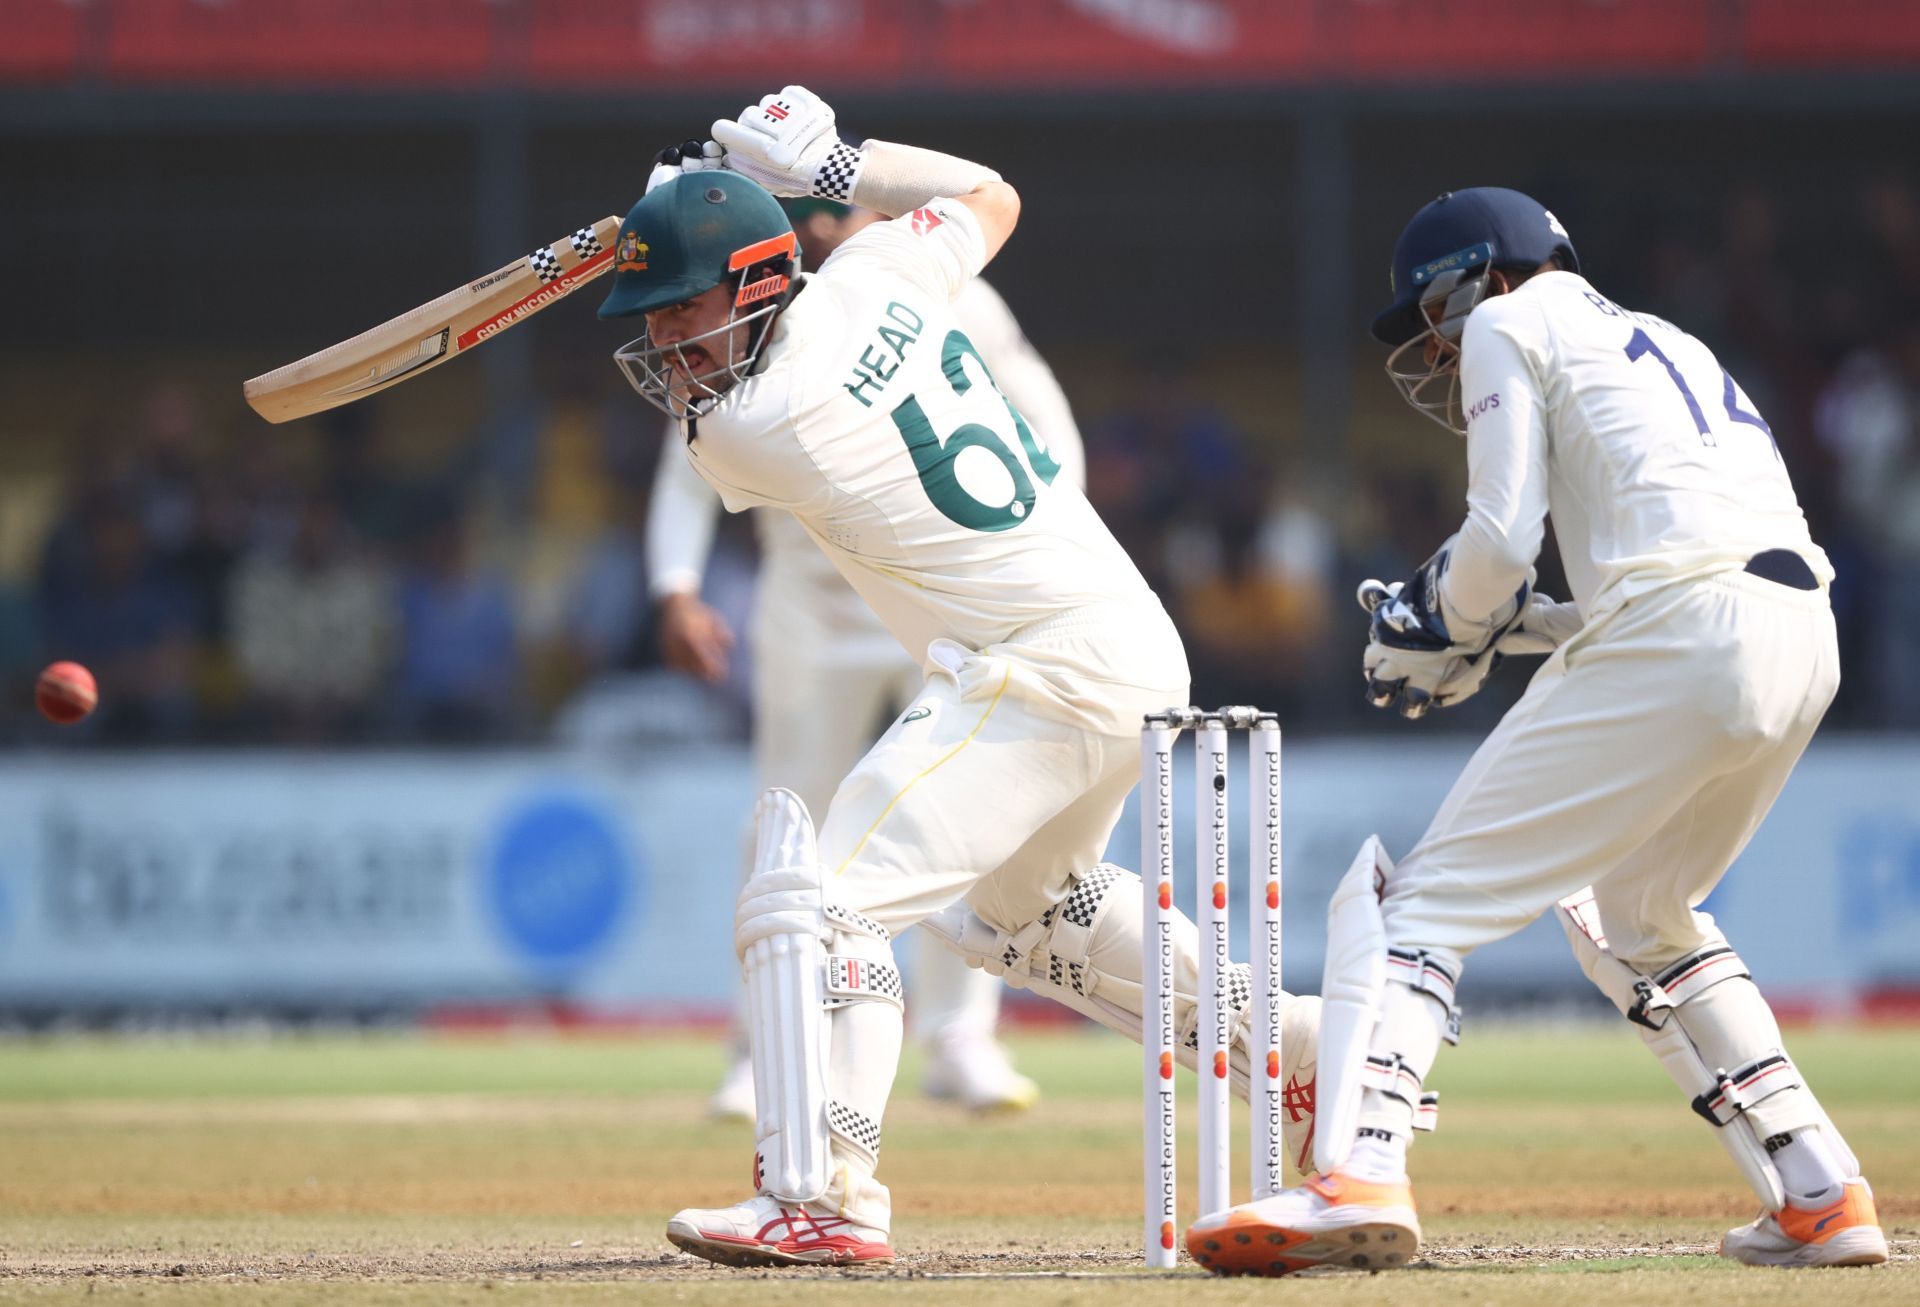 Travis Head grabbed his chances at the top of the order in India. (Pic: Getty Images)